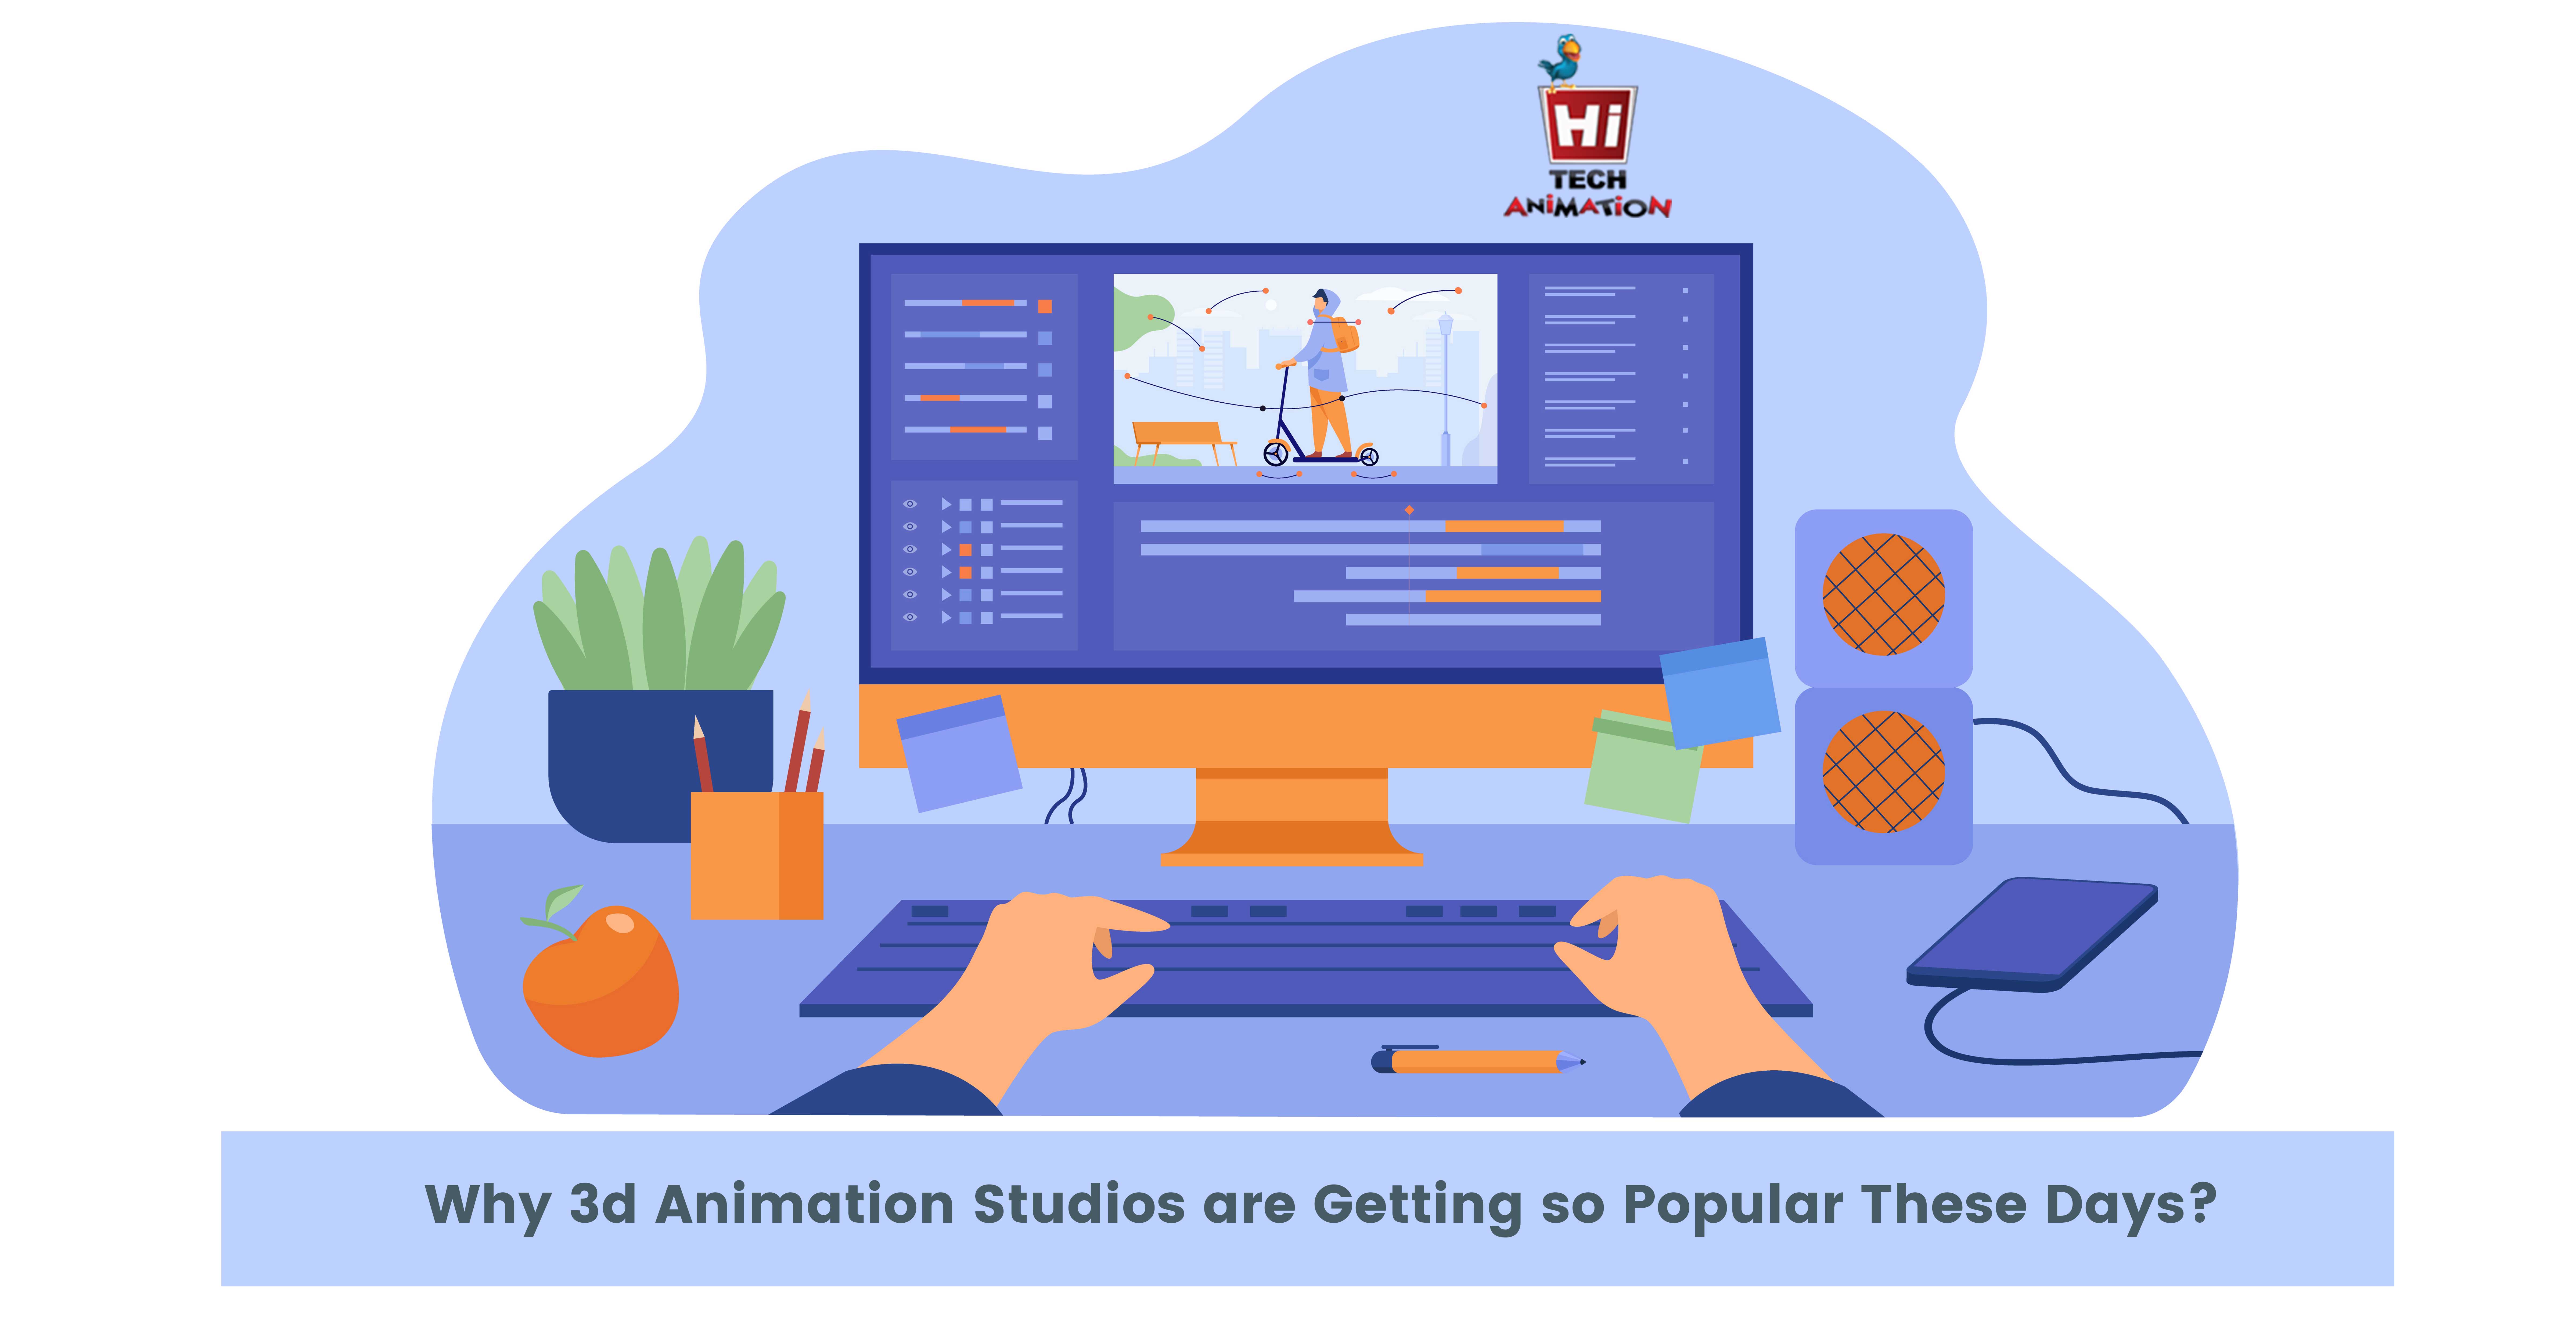 Why 3d Animation Studios are Getting so Popular These Days?